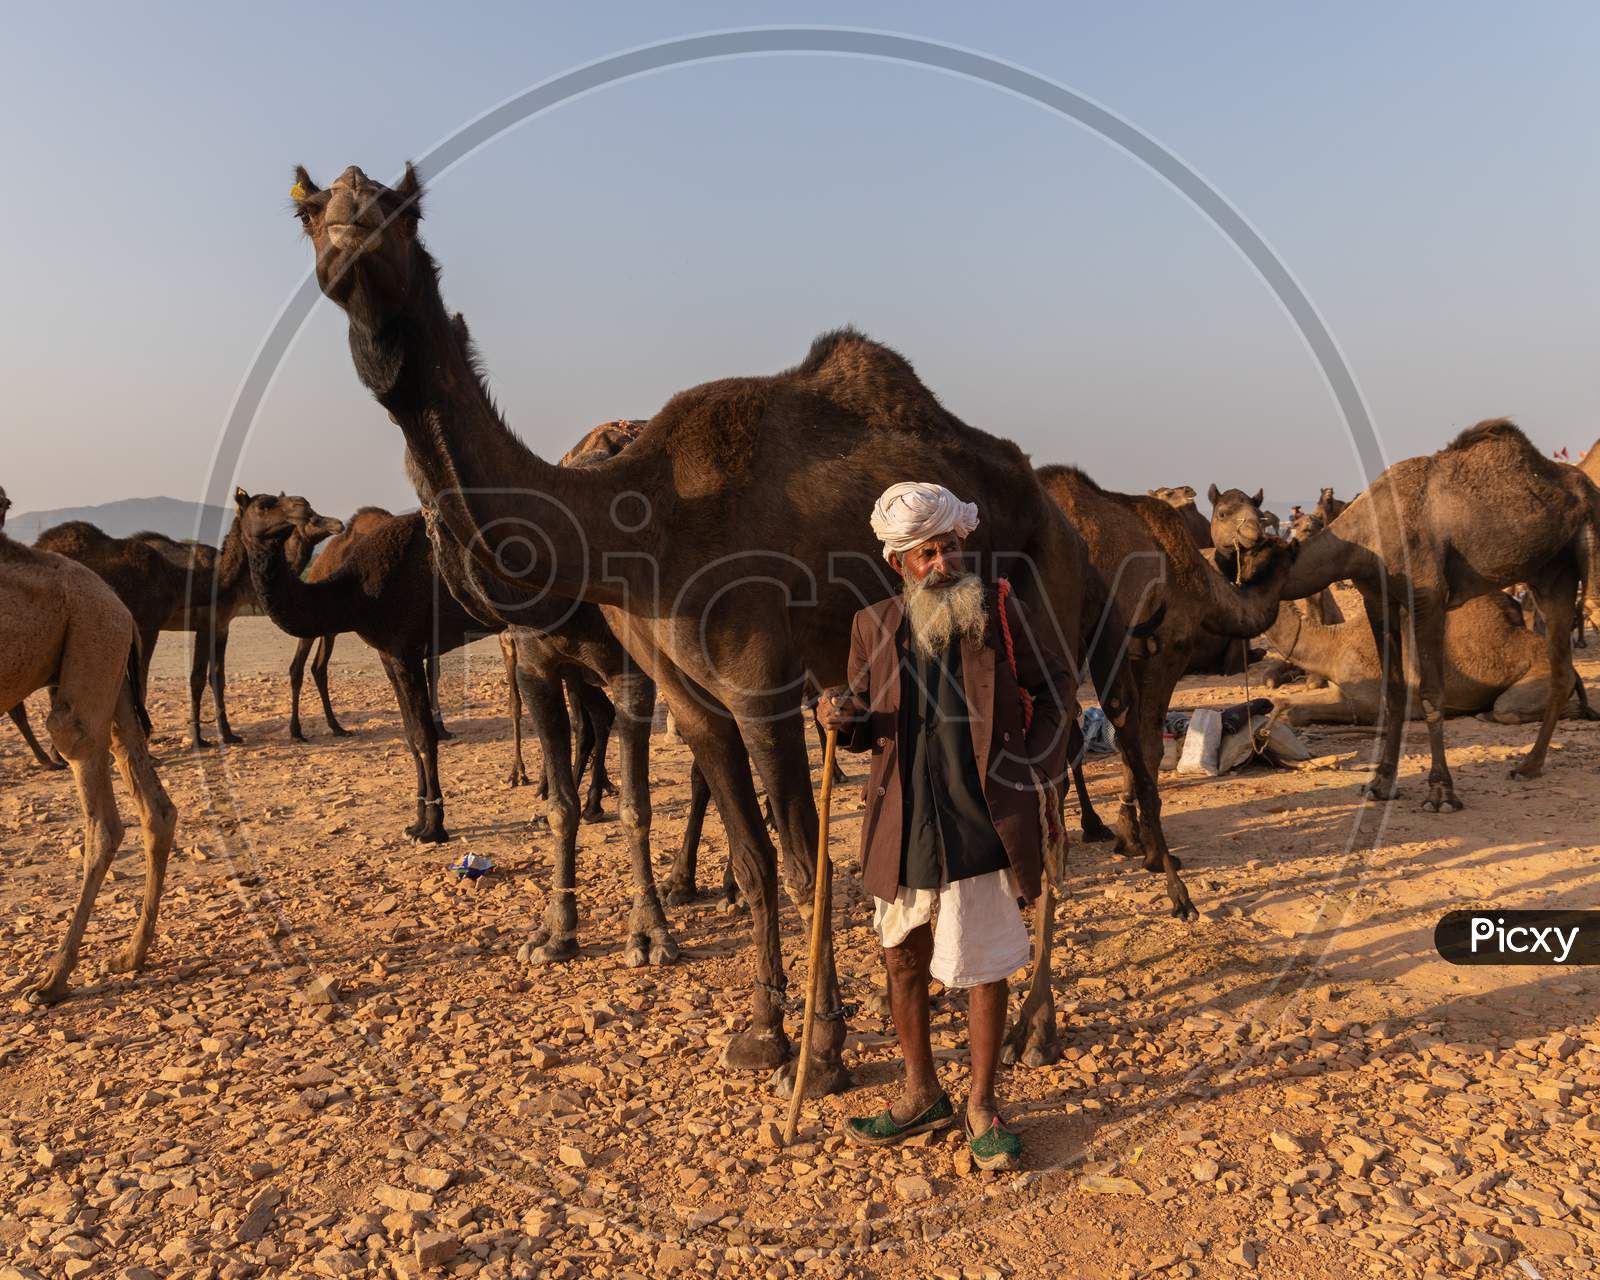 Camel traders with their camels at Pushkar